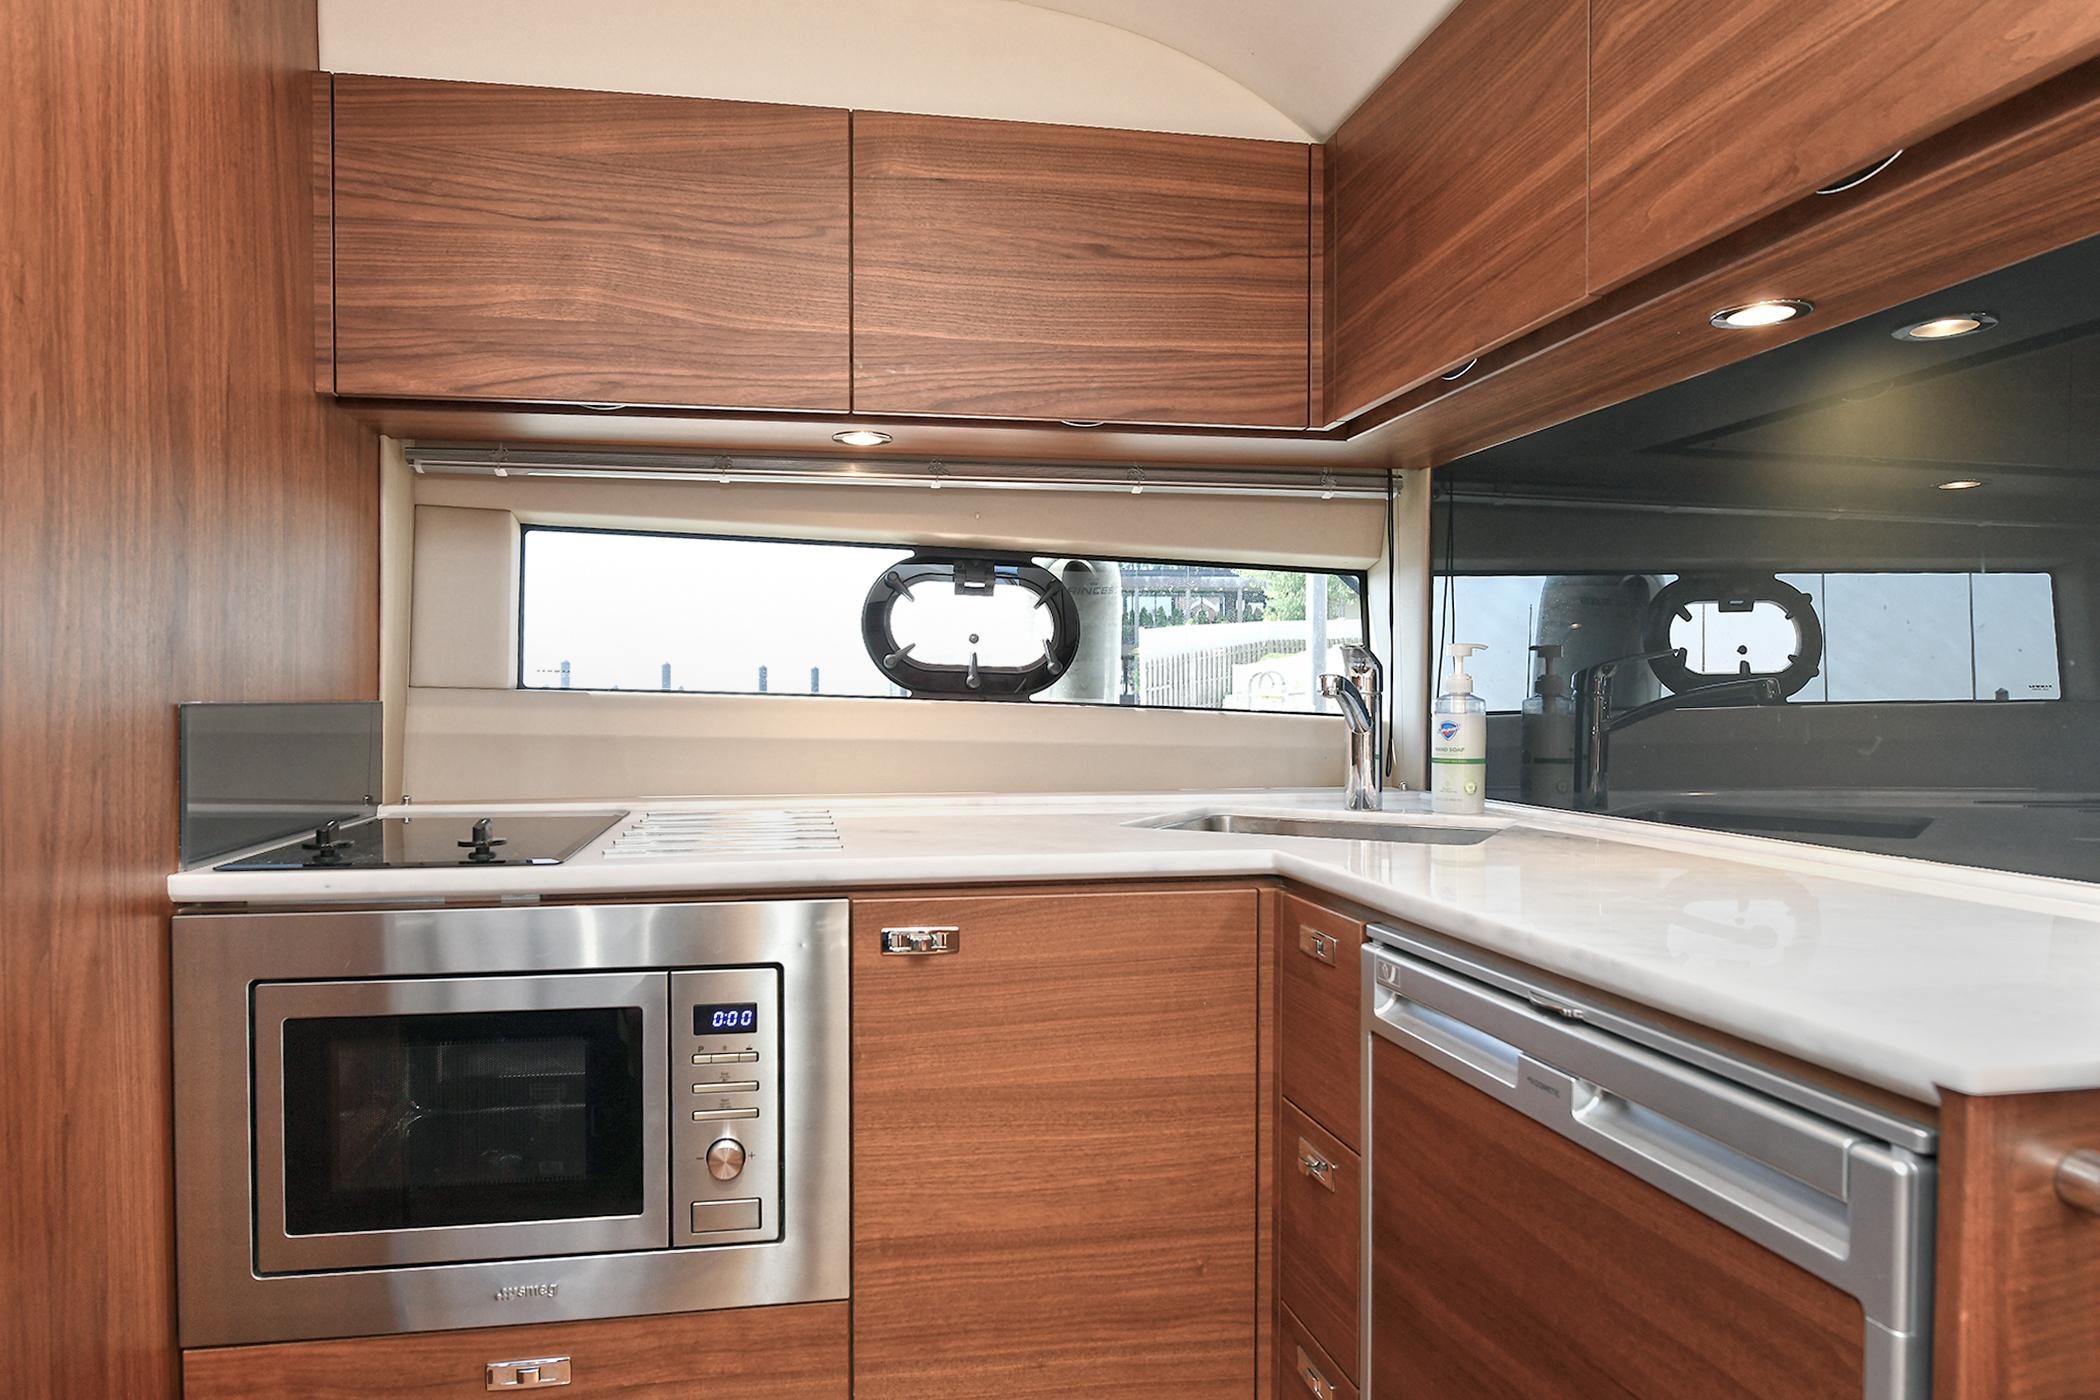 Princess 40 Eastern Shearwater - Galley Counters & Appliances